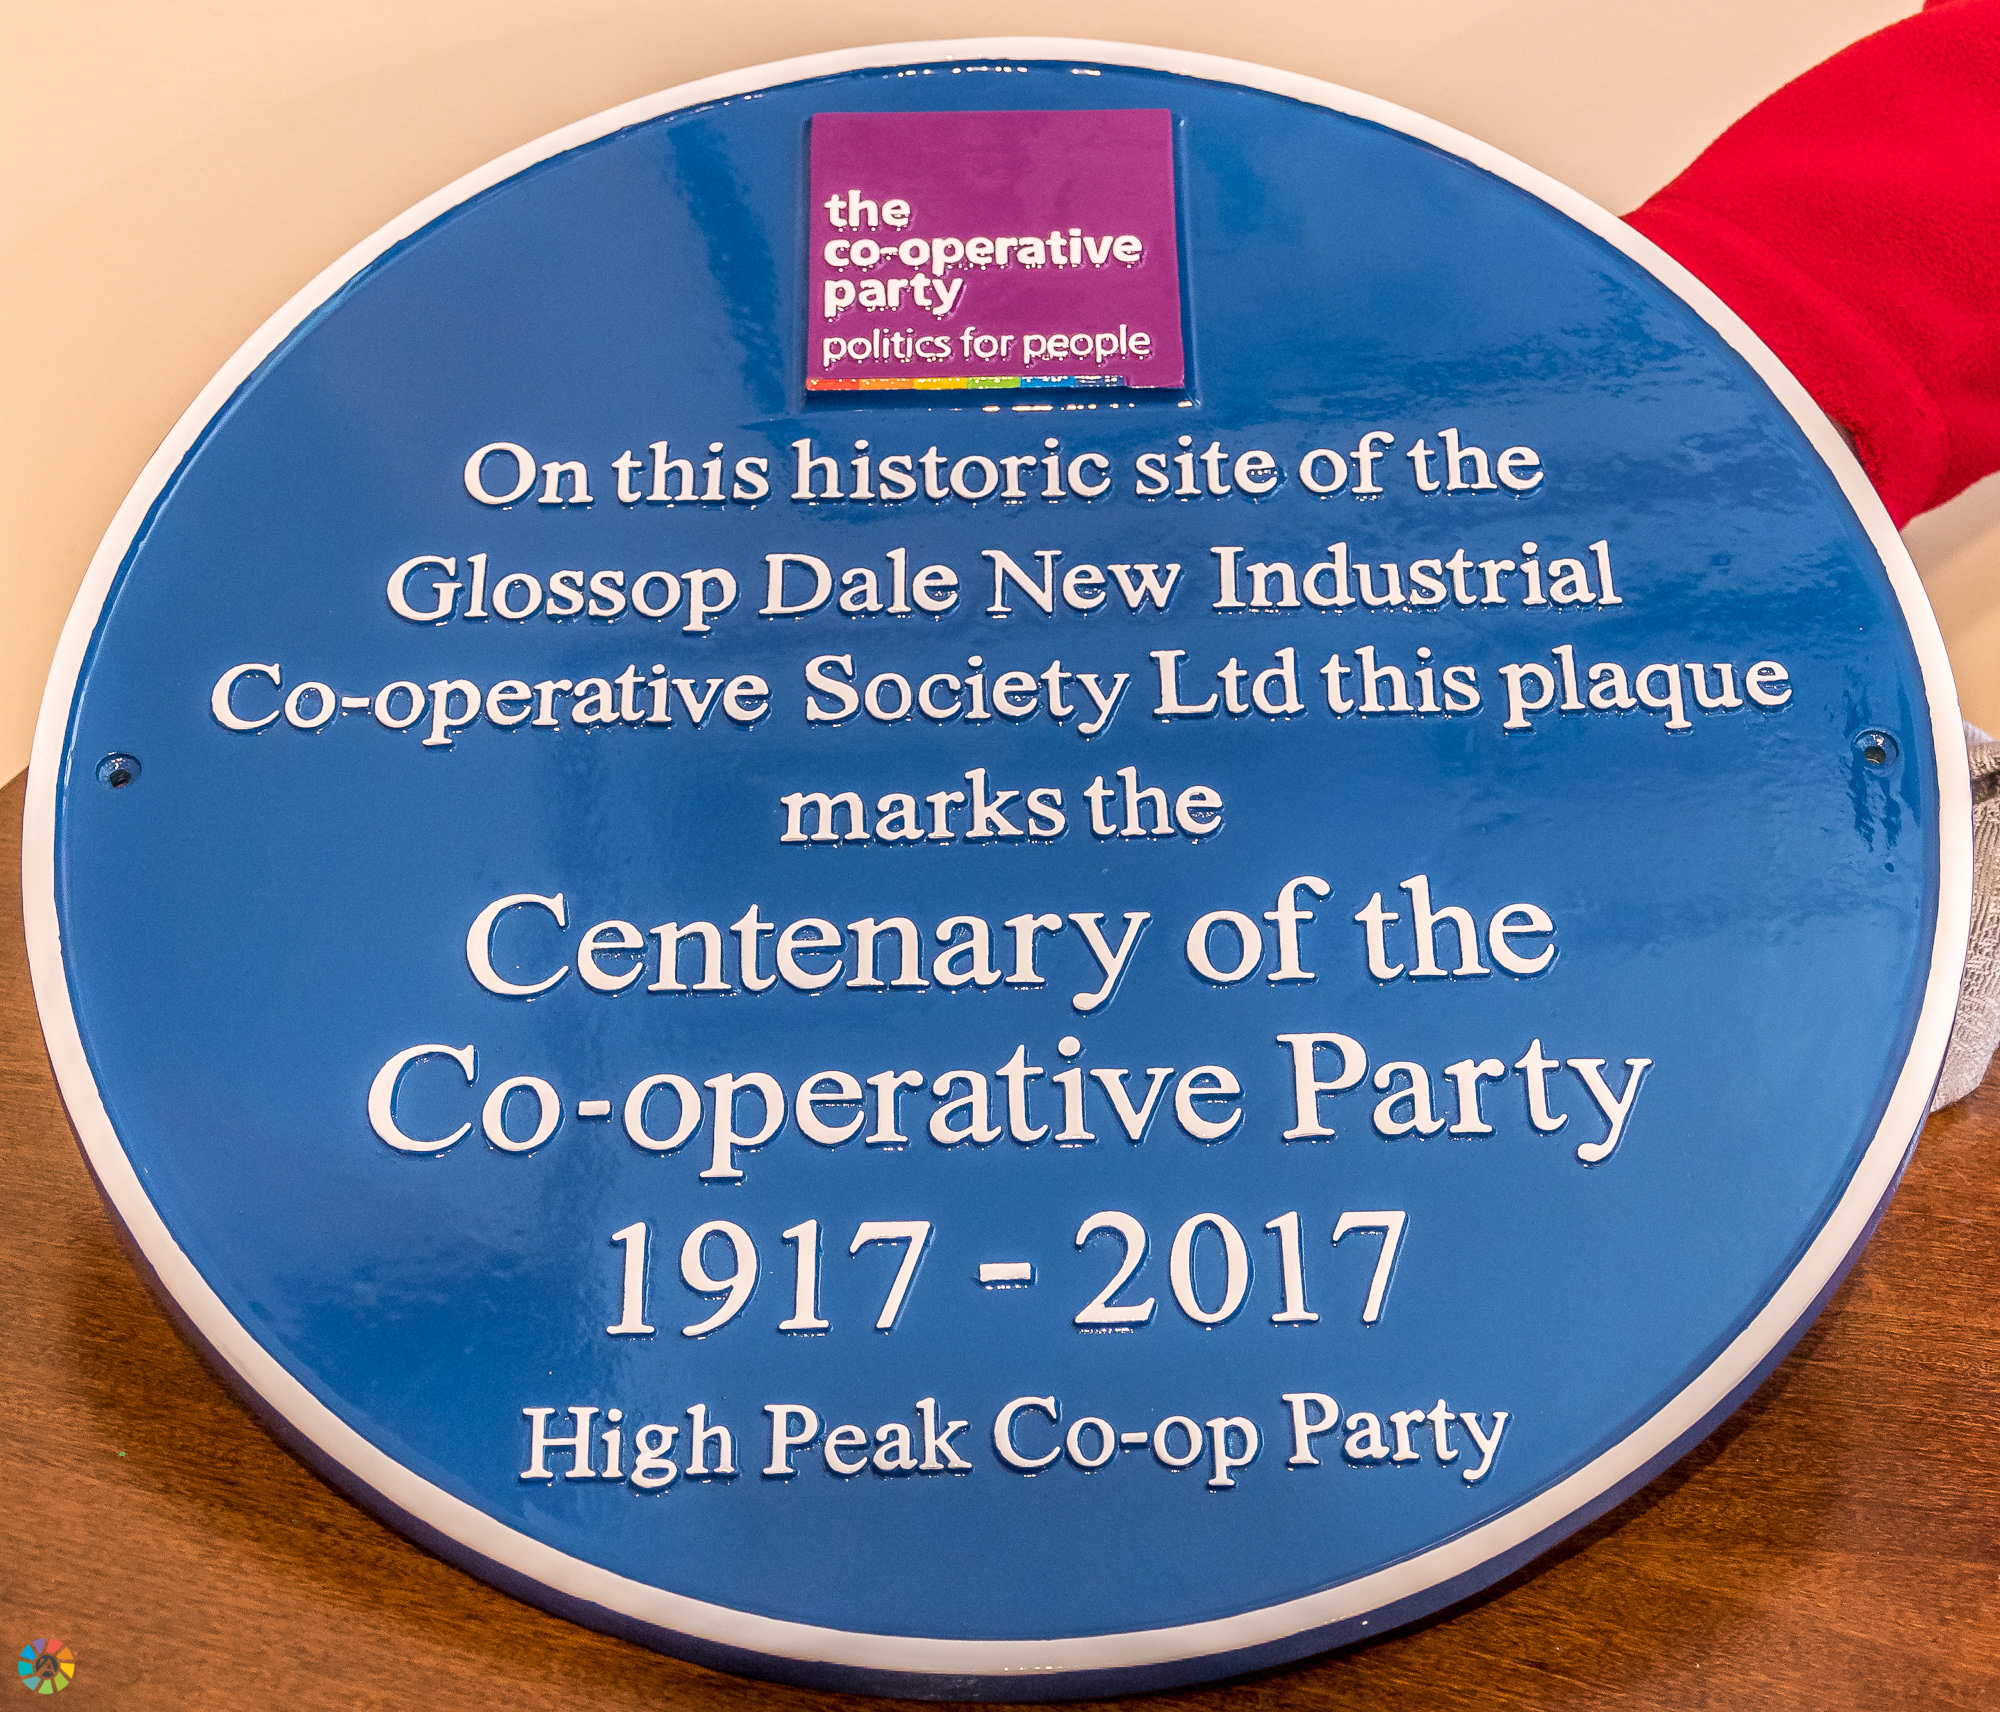 Co-operative Party 100th Anniversary